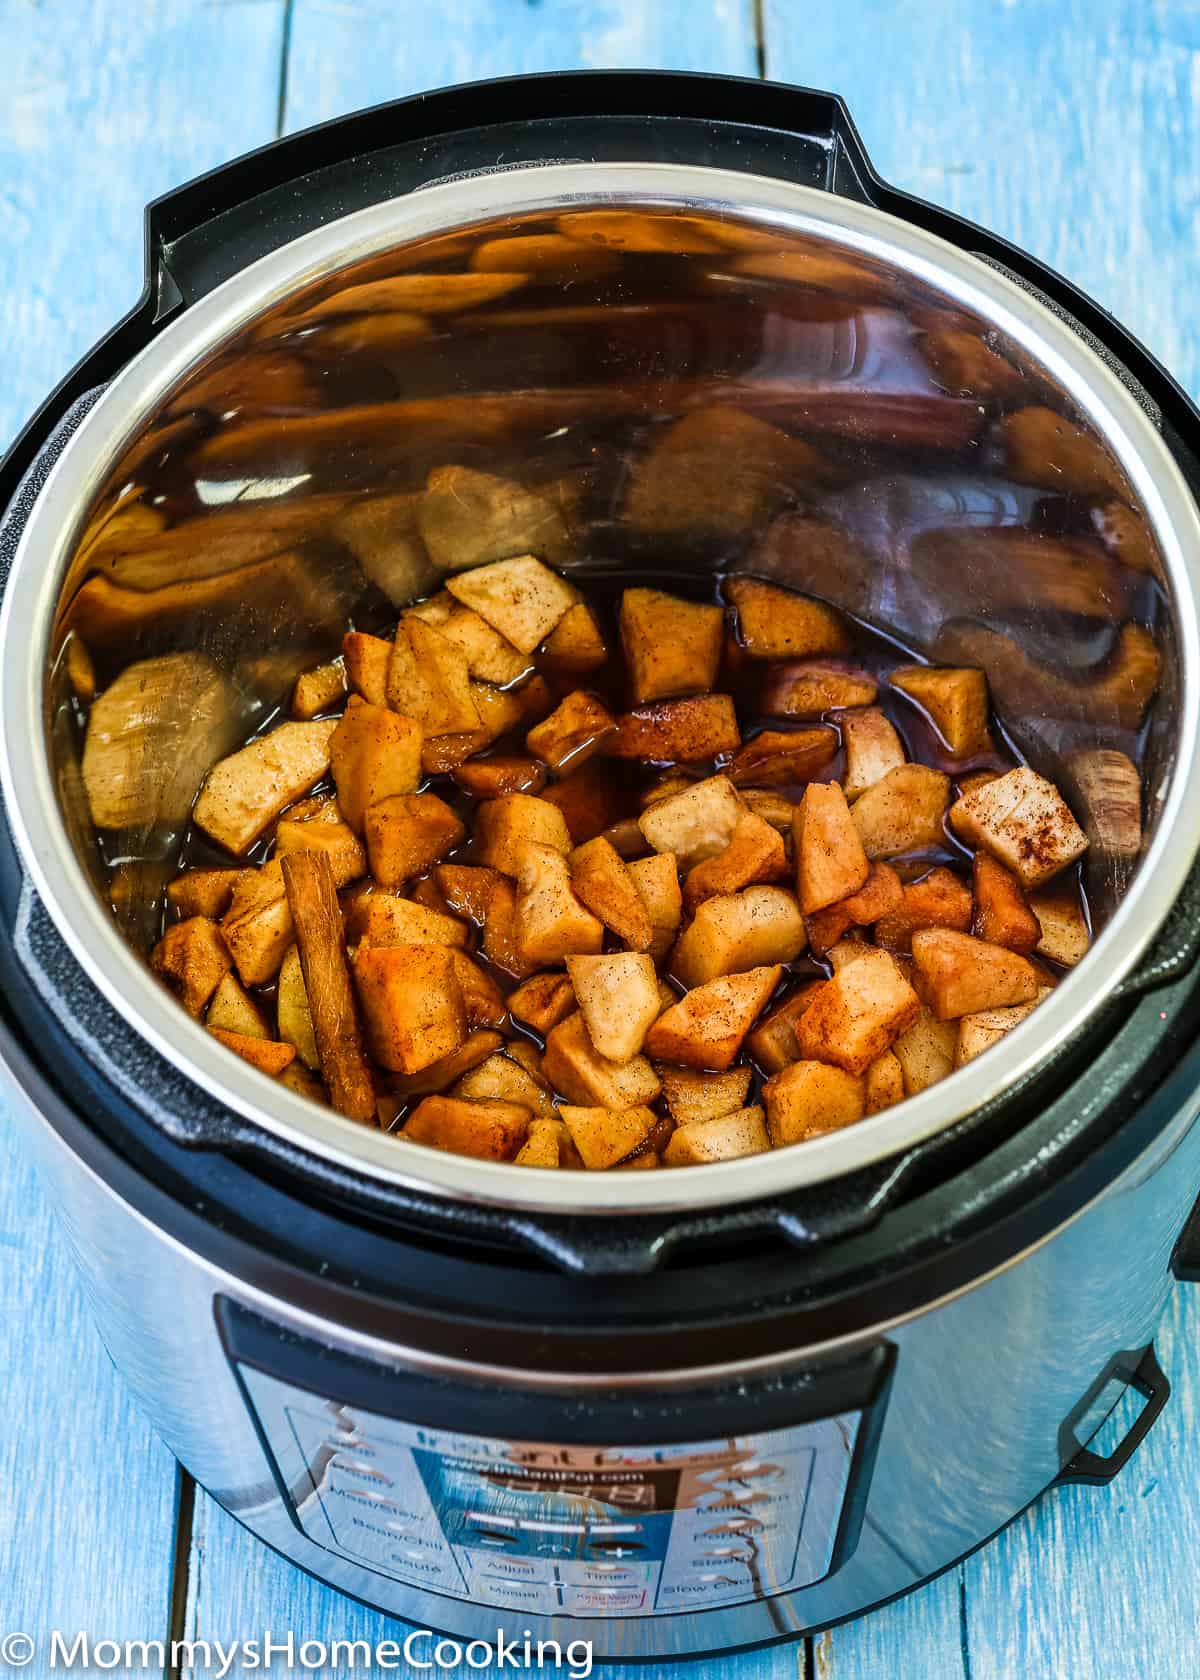 chopped apples with cinnamon in a pressure cooker